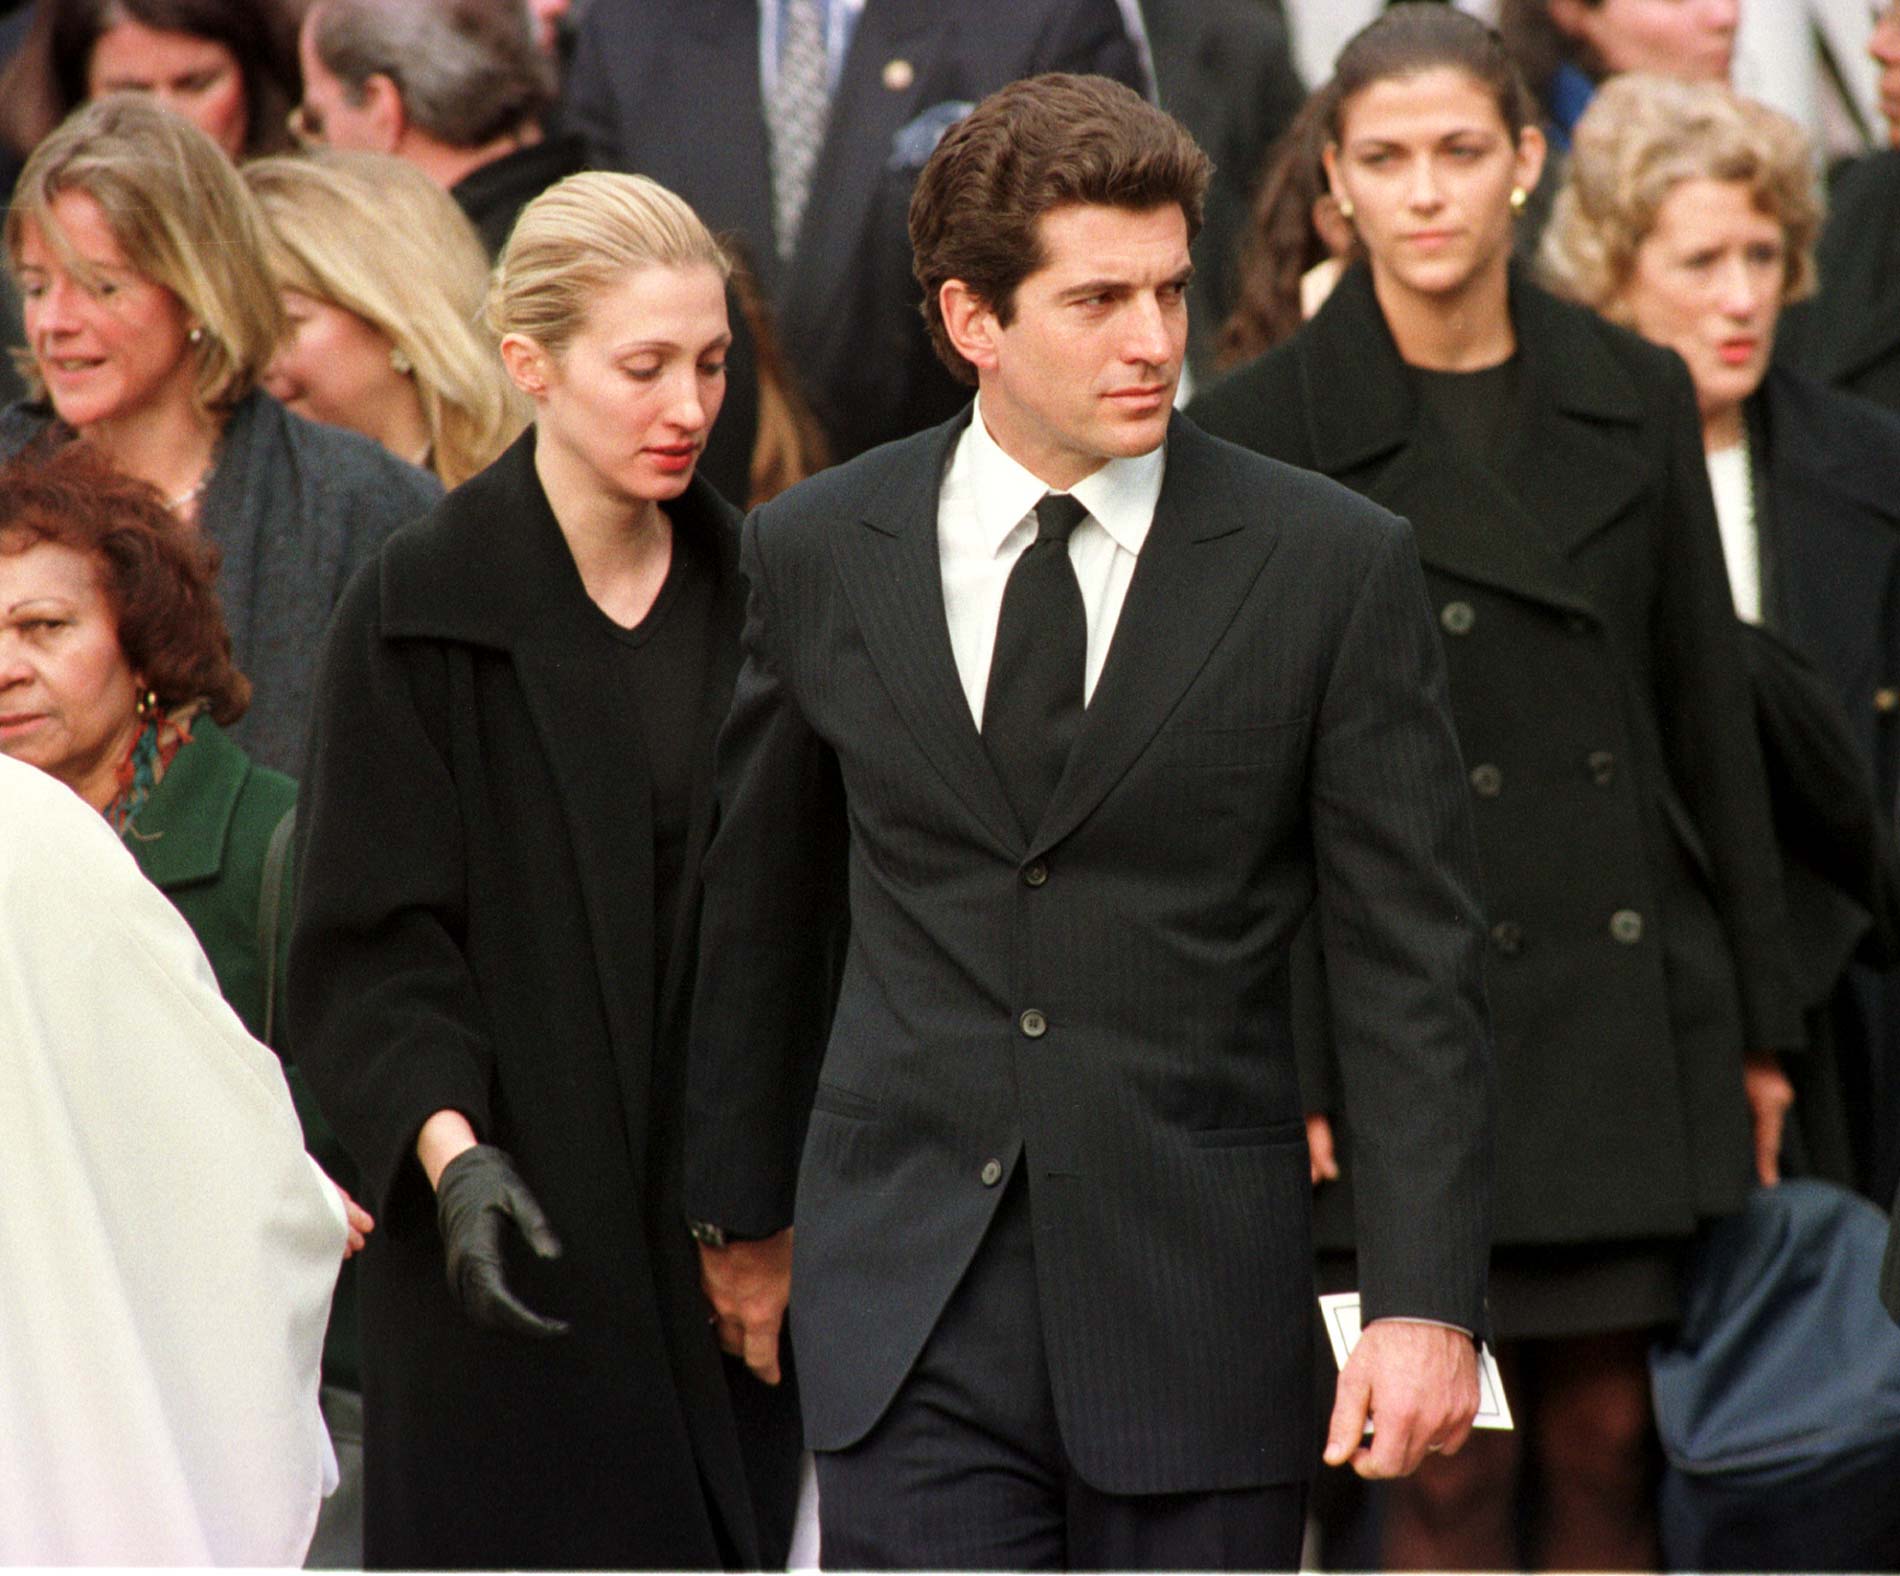 John F. Kennedy Jr. with Carolyn Besette following Michael Kennedy's funeral on January 3, 1998 in Massachusetts. / Source: Getty Images